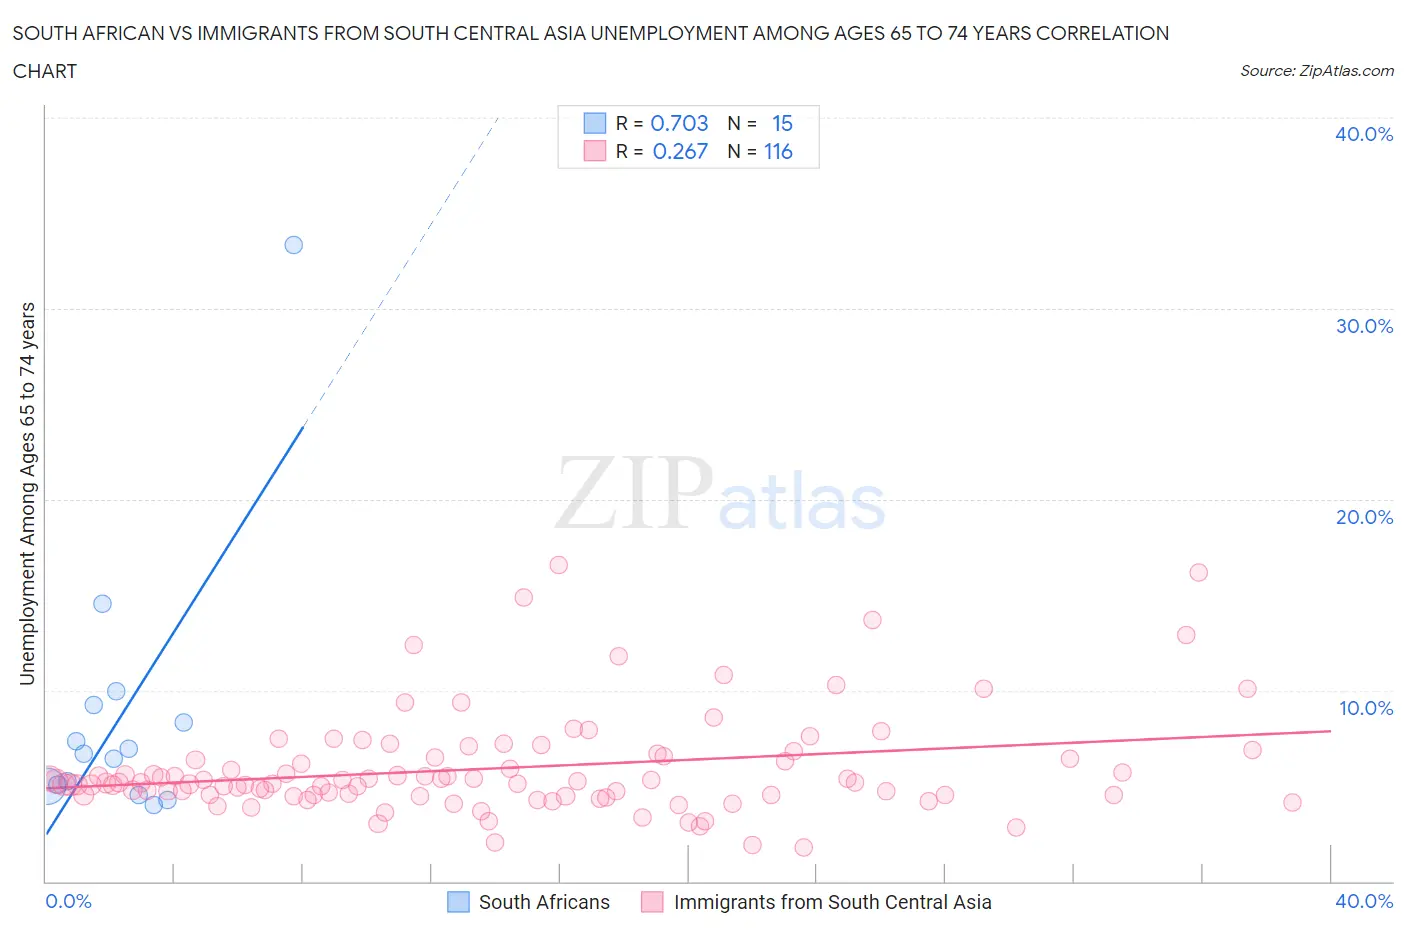 South African vs Immigrants from South Central Asia Unemployment Among Ages 65 to 74 years